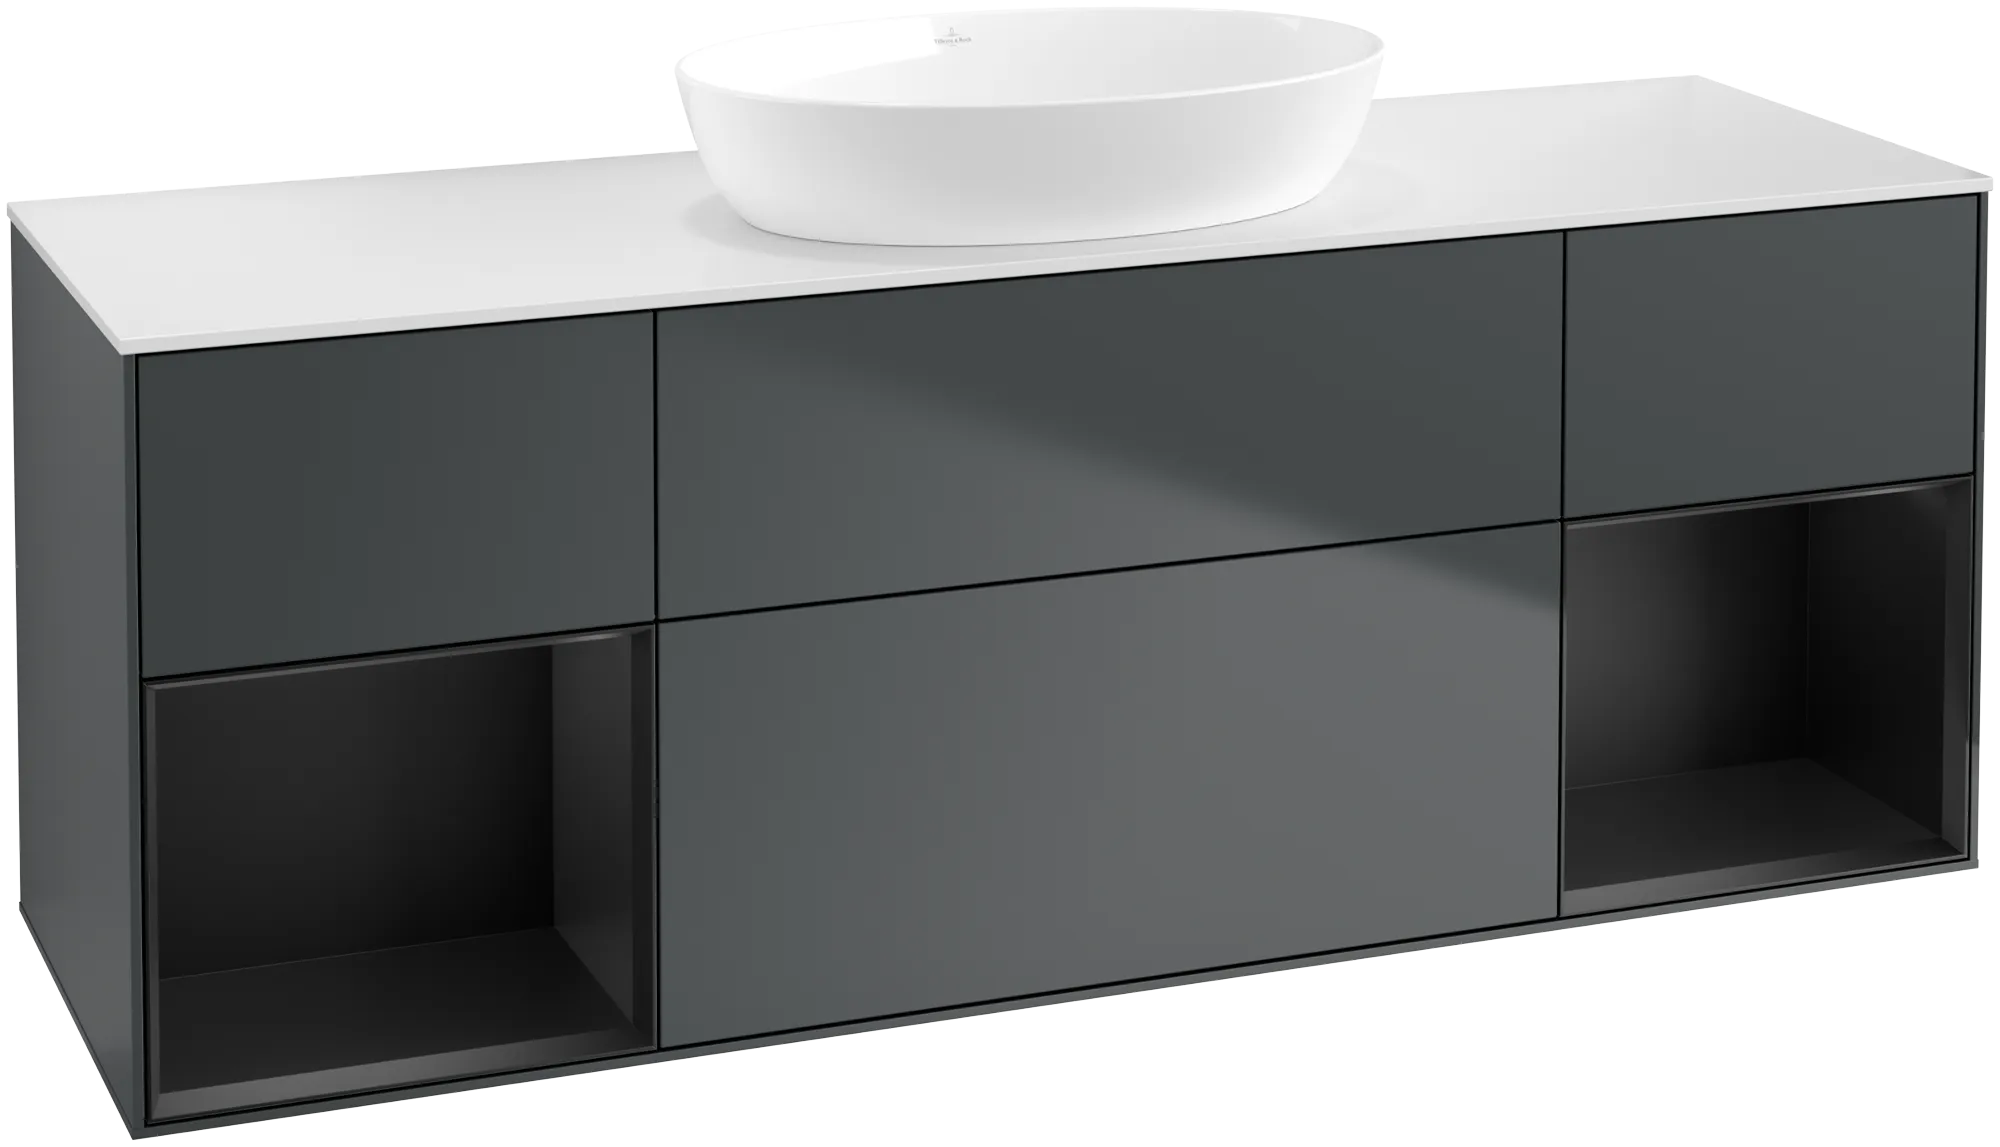 Picture of VILLEROY BOCH Finion Vanity unit, with lighting, 4 pull-out compartments, 1600 x 603 x 501 mm, Midnight Blue Matt Lacquer / Black Matt Lacquer / Glass White Matt #GD01PDHG